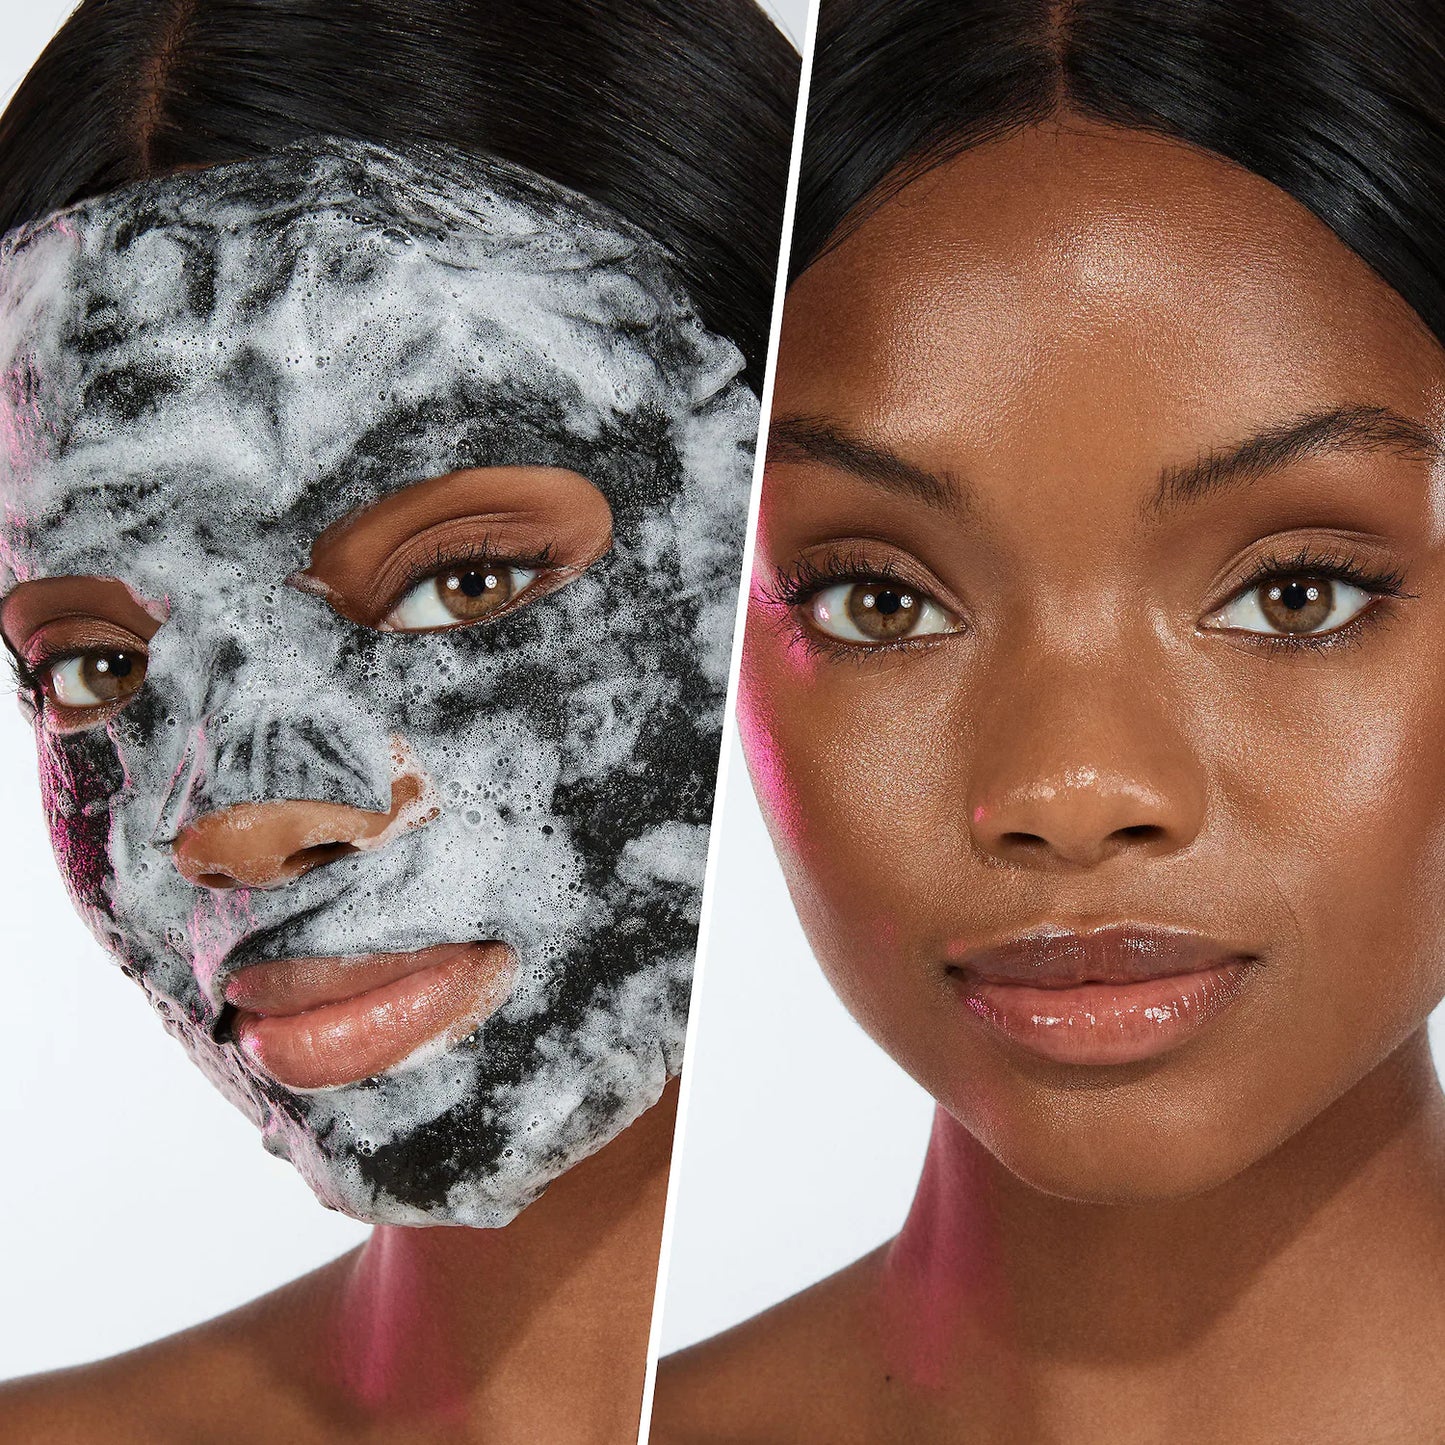 GLAMGLOW - Pre-Party Prep: Oxygenating Deep Cleanse Sheet Mask Trio